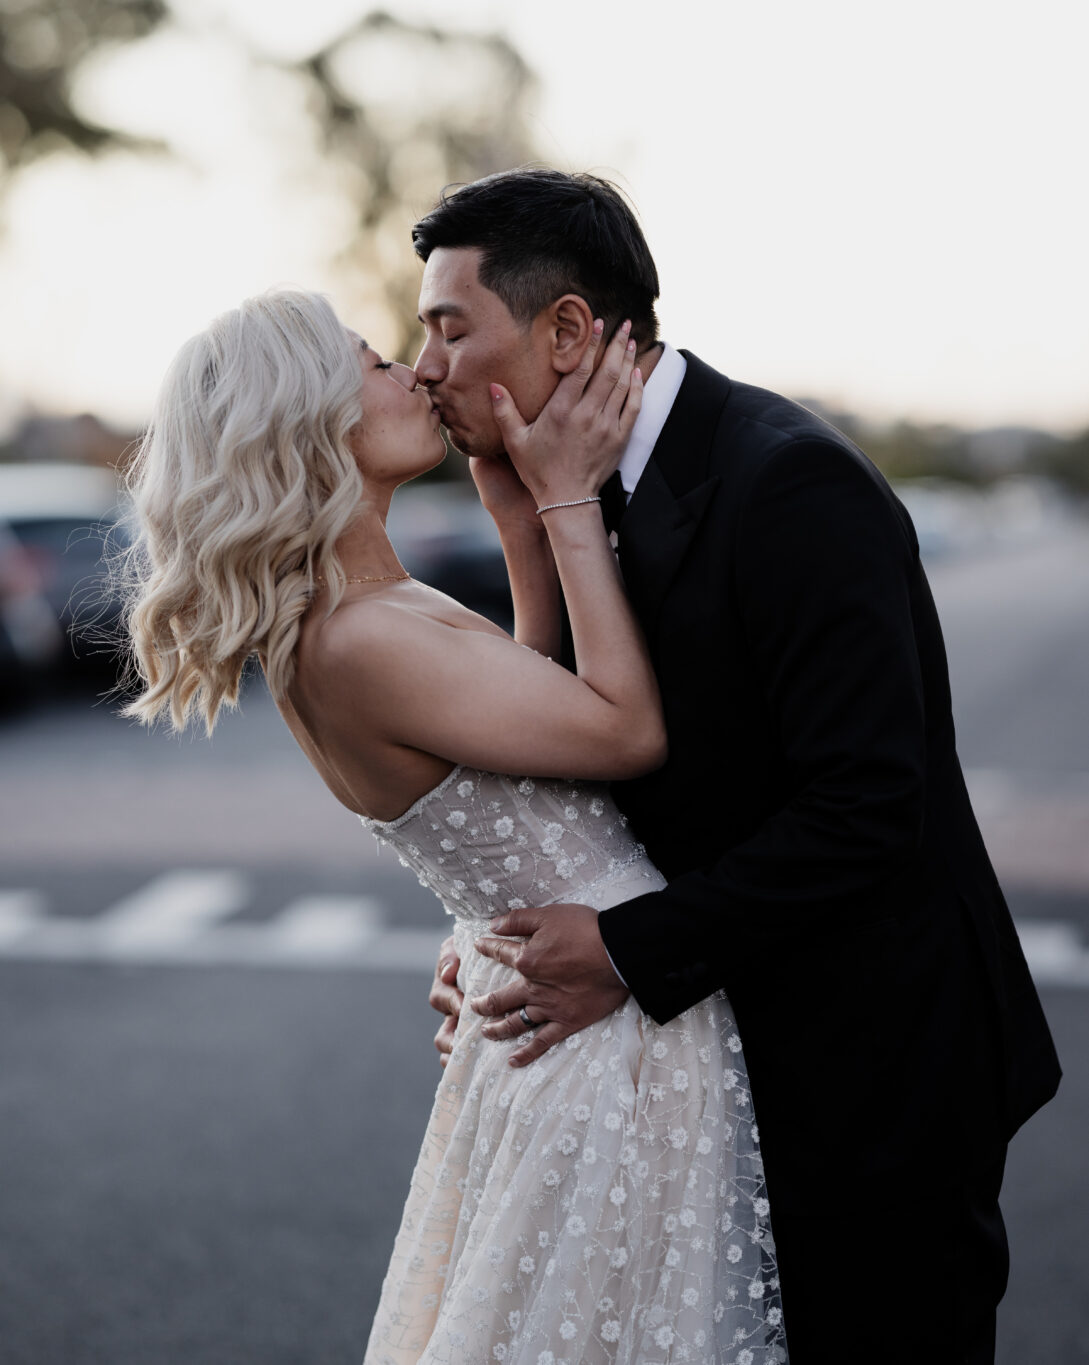 Whitney & Tan || 27-11-21 || The Wool Mill